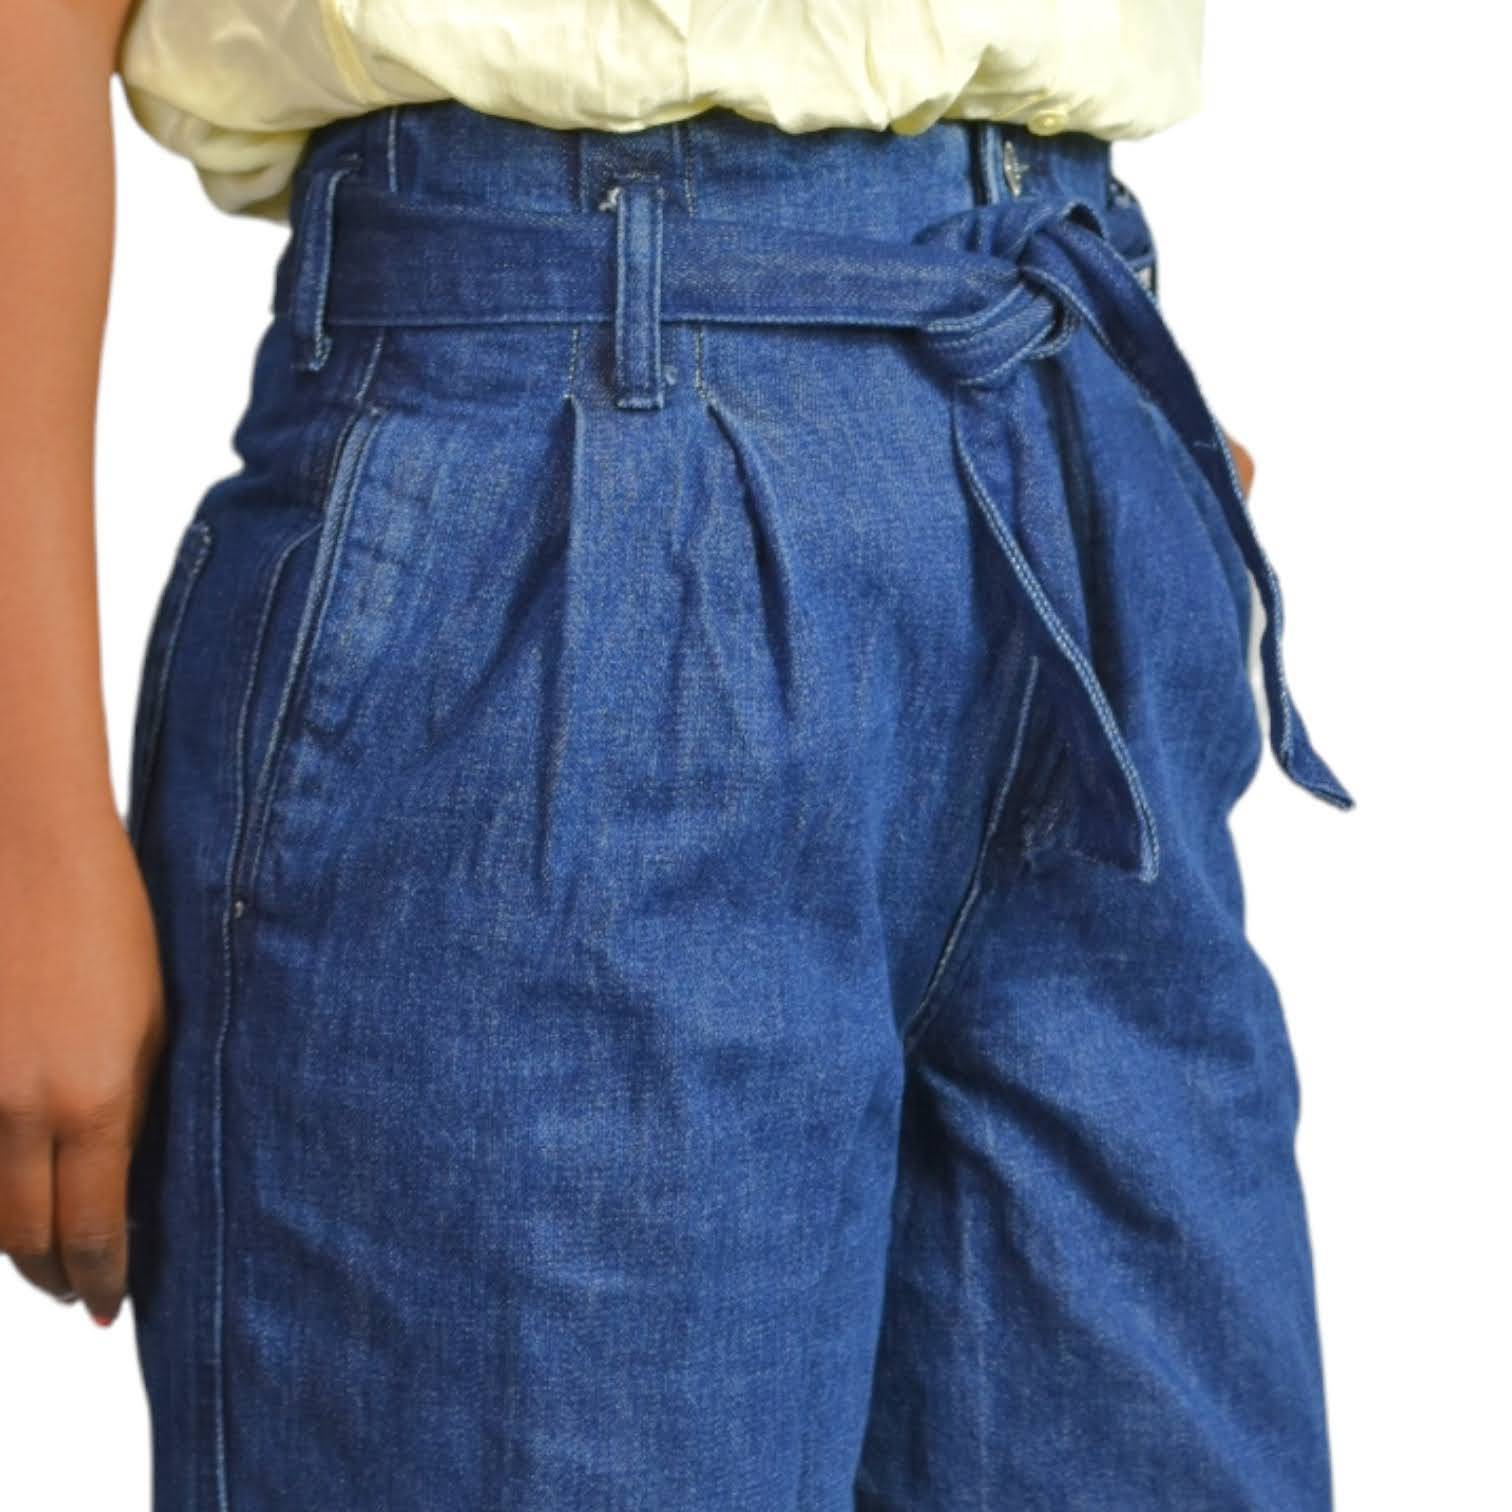 Zara Paperbag Waist Jeans Flare Belted Trouser High Rise Pleated Wide Leg Size 2